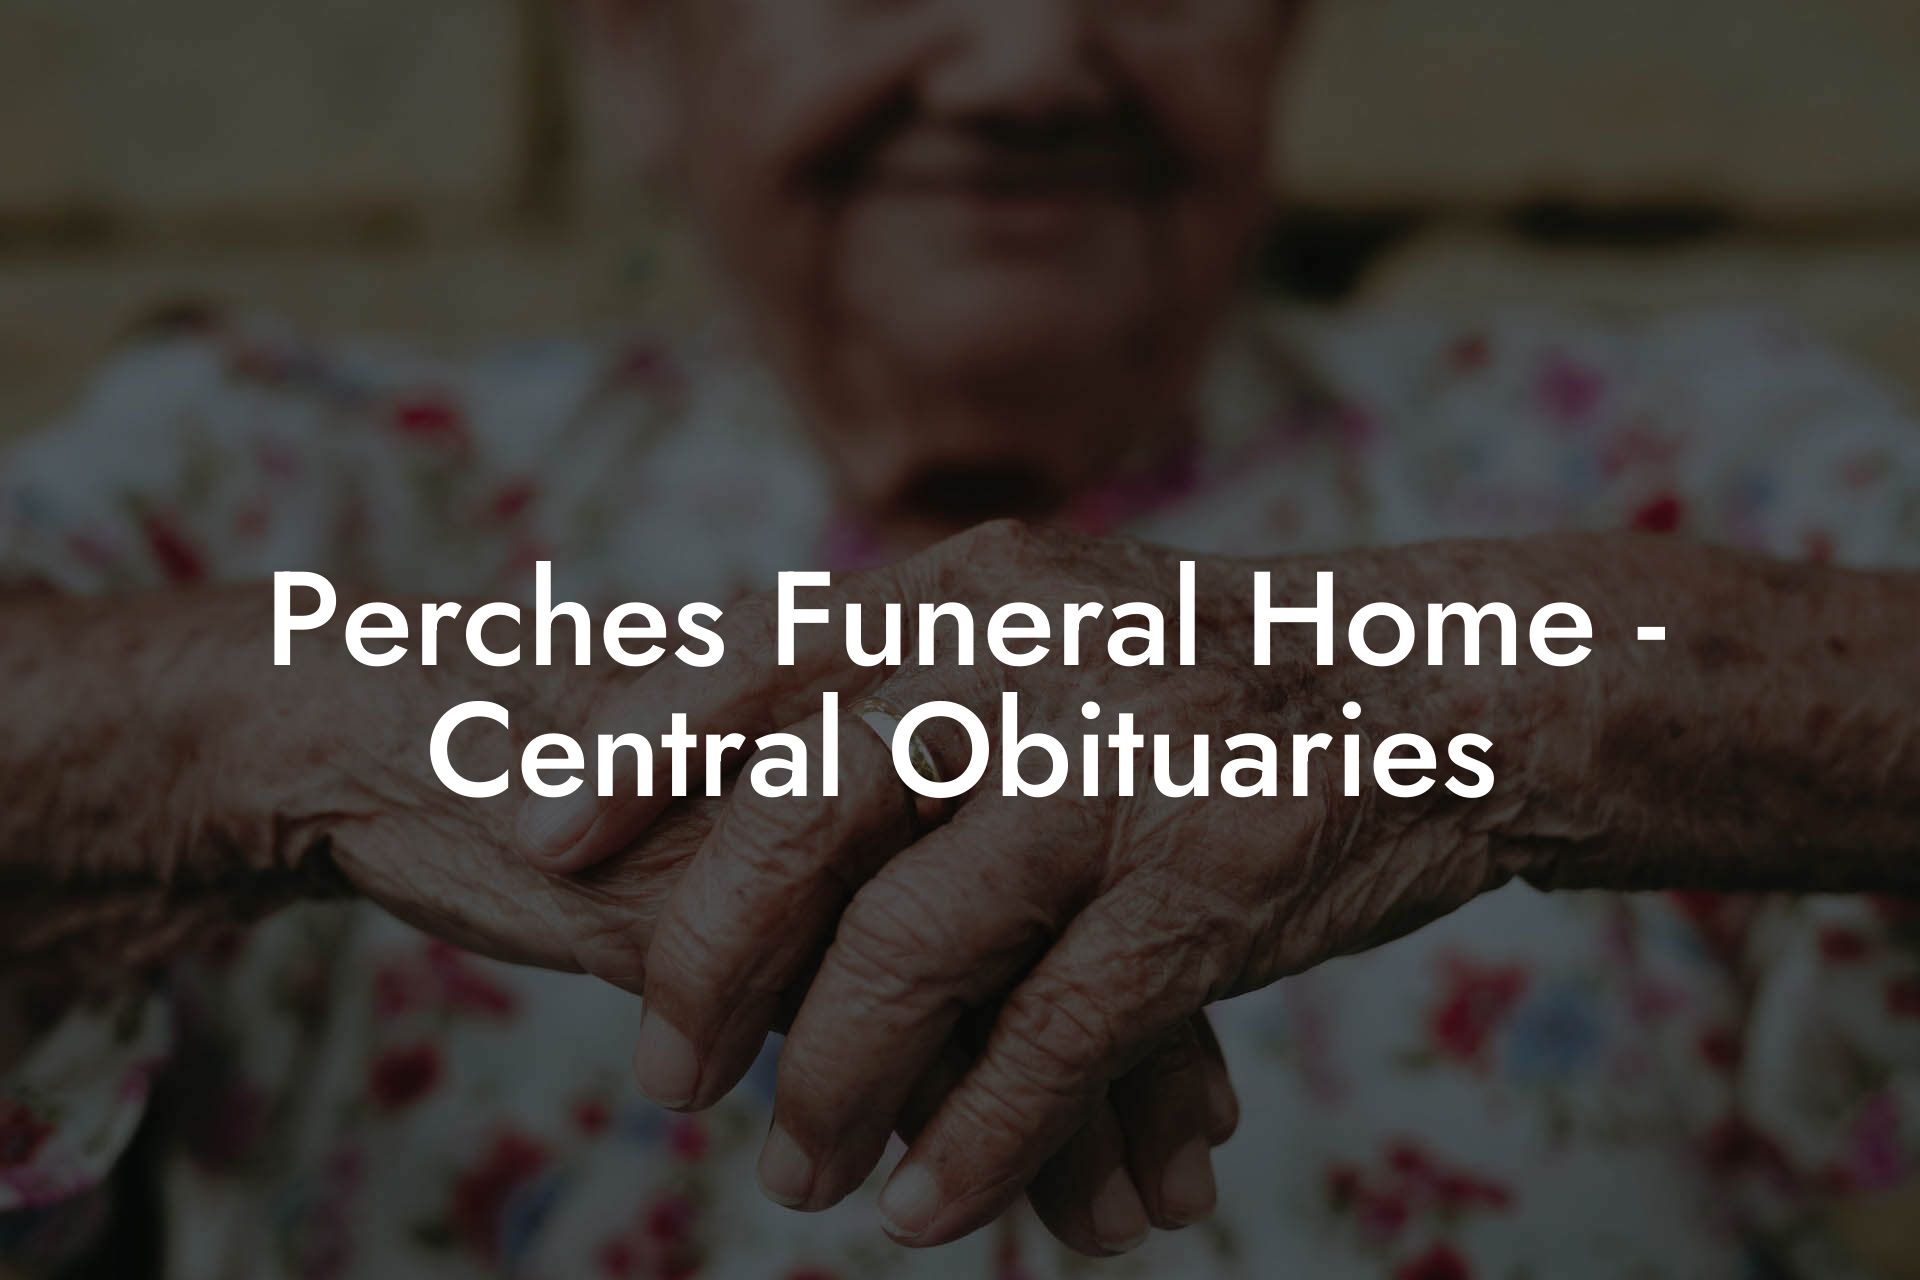 Perches Funeral Home - Central Obituaries